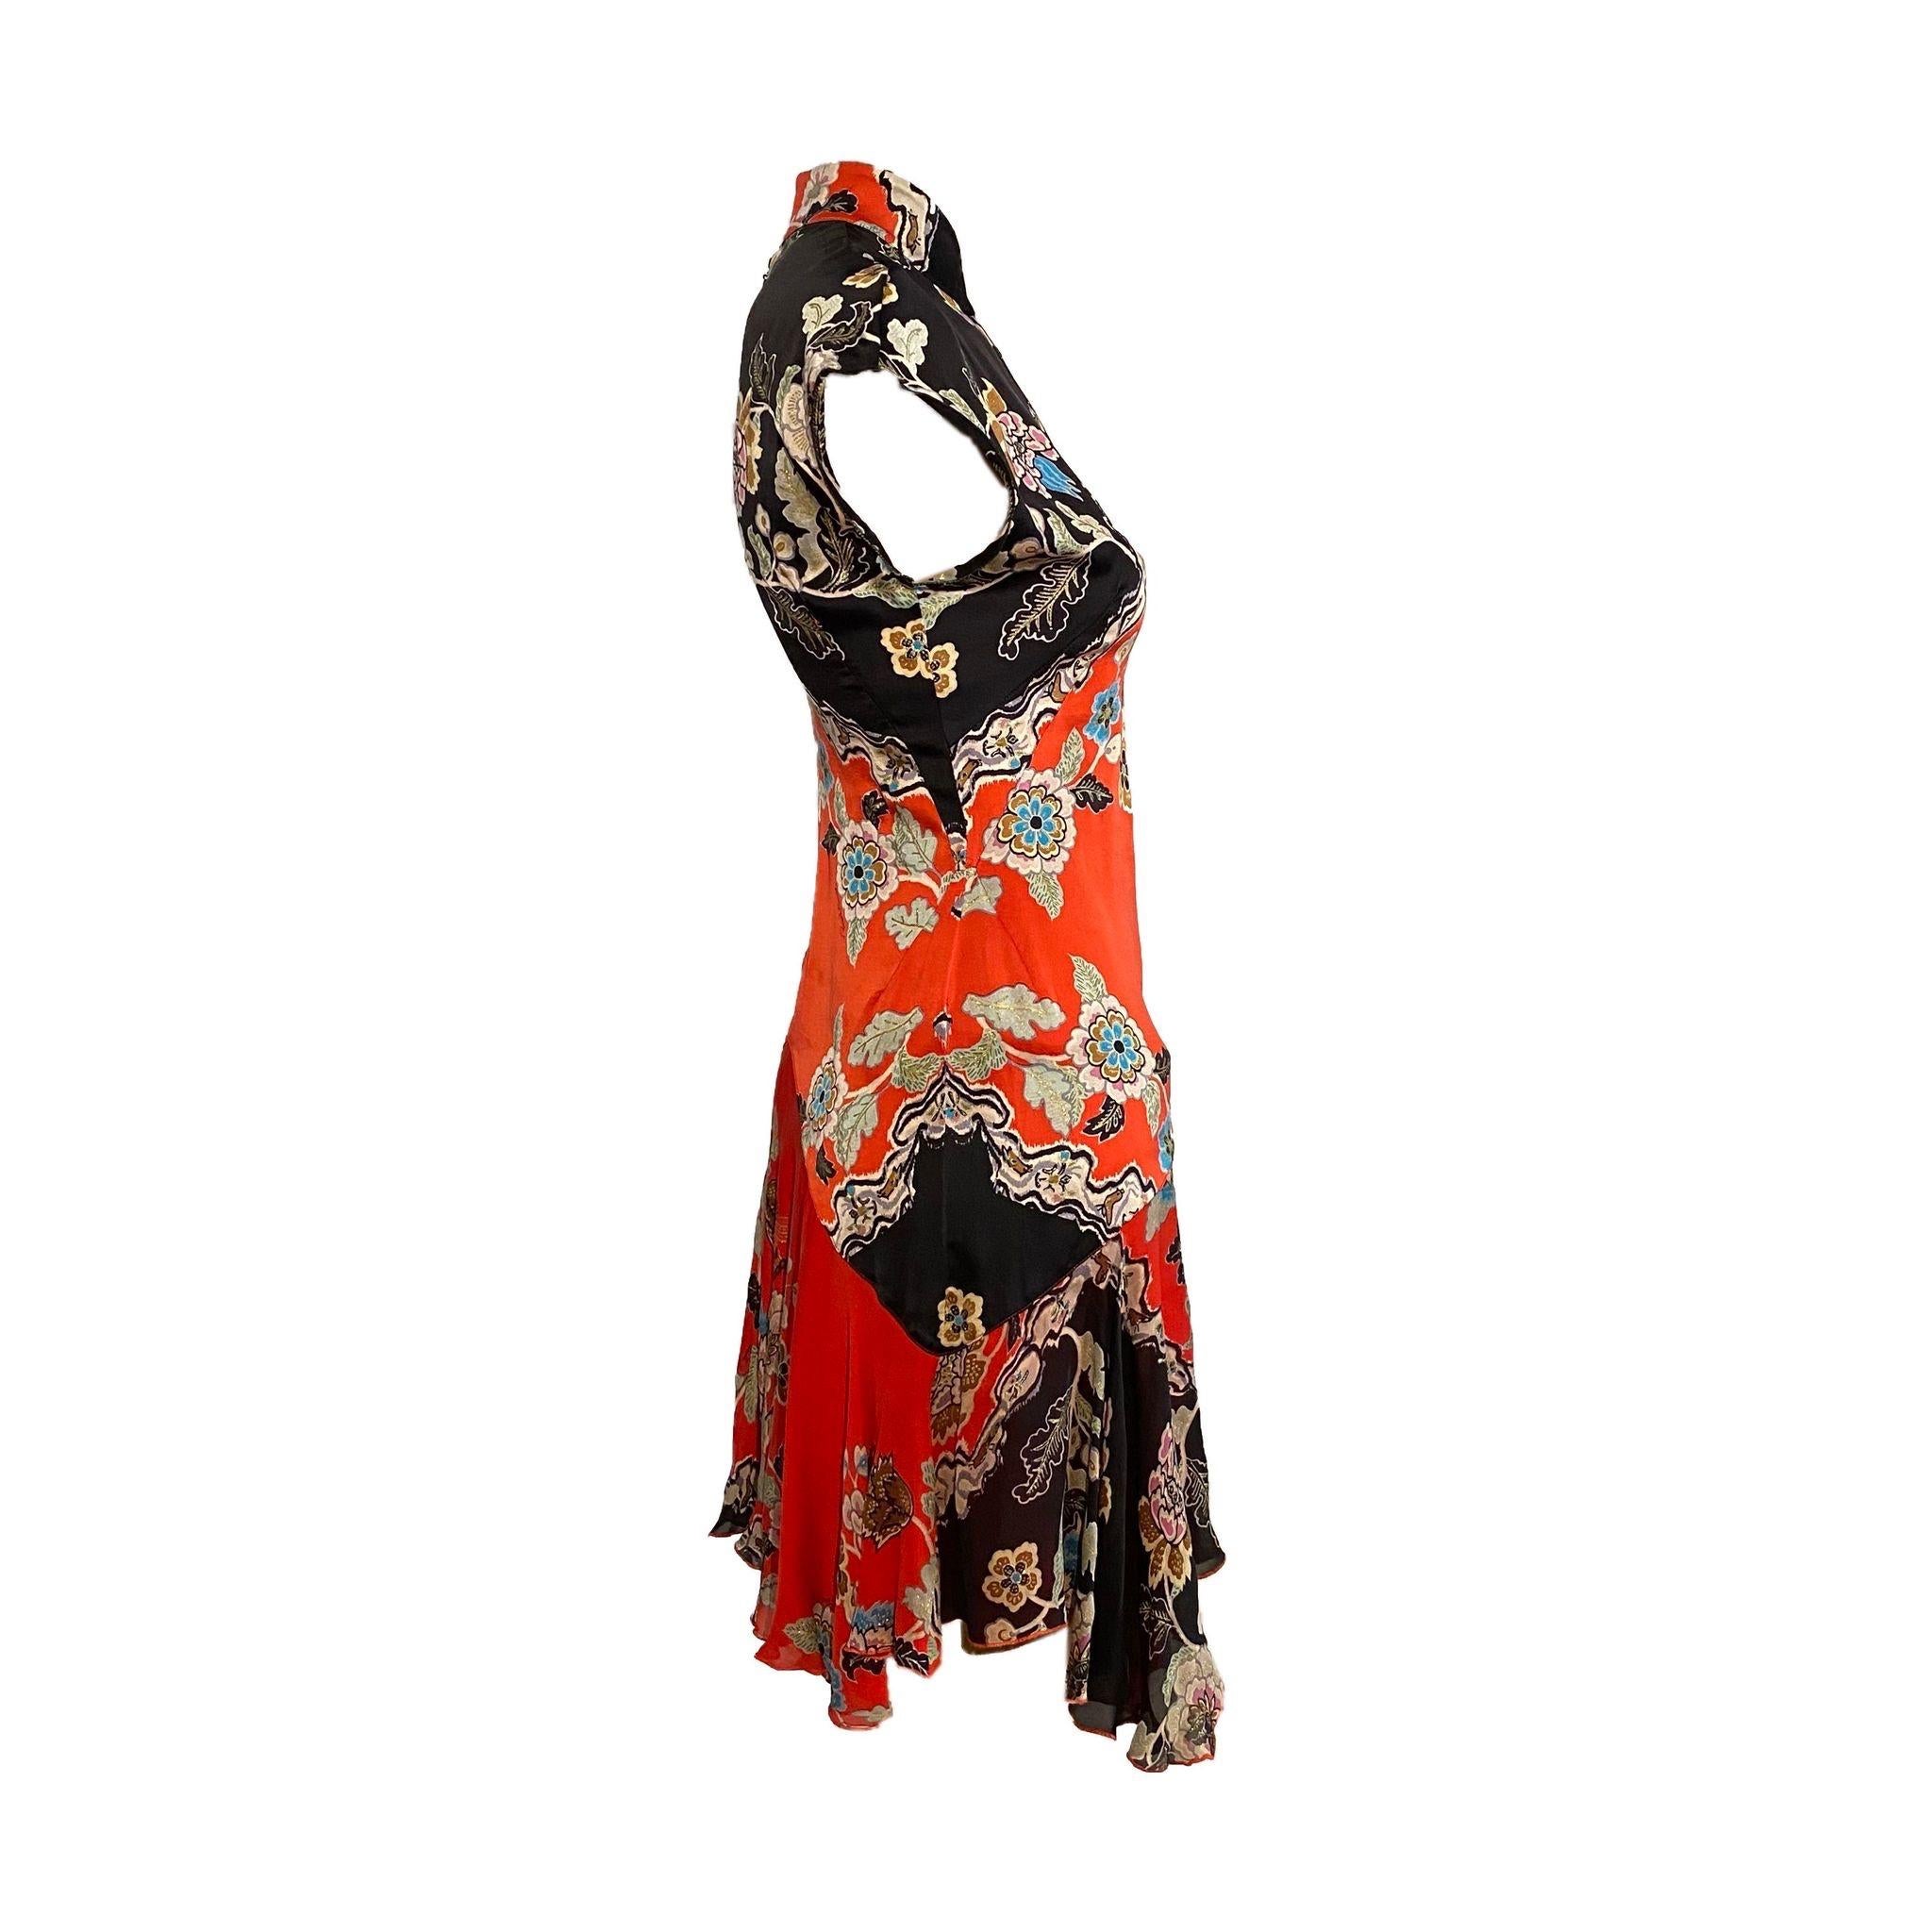 Roberto Cavalli Cheongsam-inspired Mini Dress with Front Slit from the Spring/Summer 2003 collection, similar version seen on Esther Cañadas on final look. Vibrant oriental print in red and black, bias cut.

Size S, 100% Silk

Measurements:

Bust -